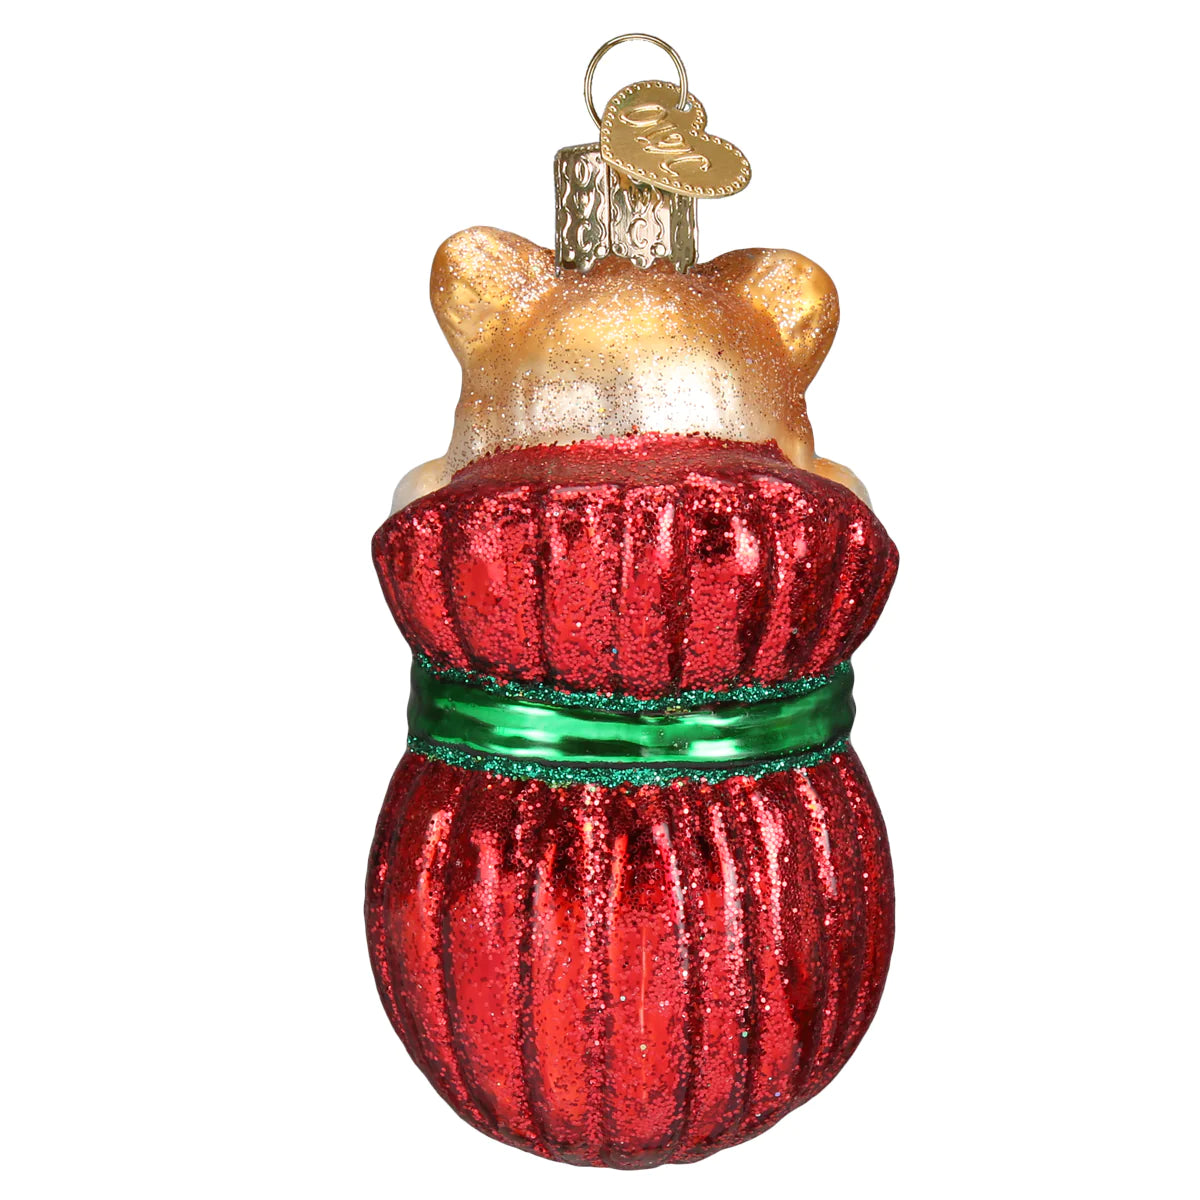 Letting The Cat Out Of The Bag Ornament  Old World Christmas   